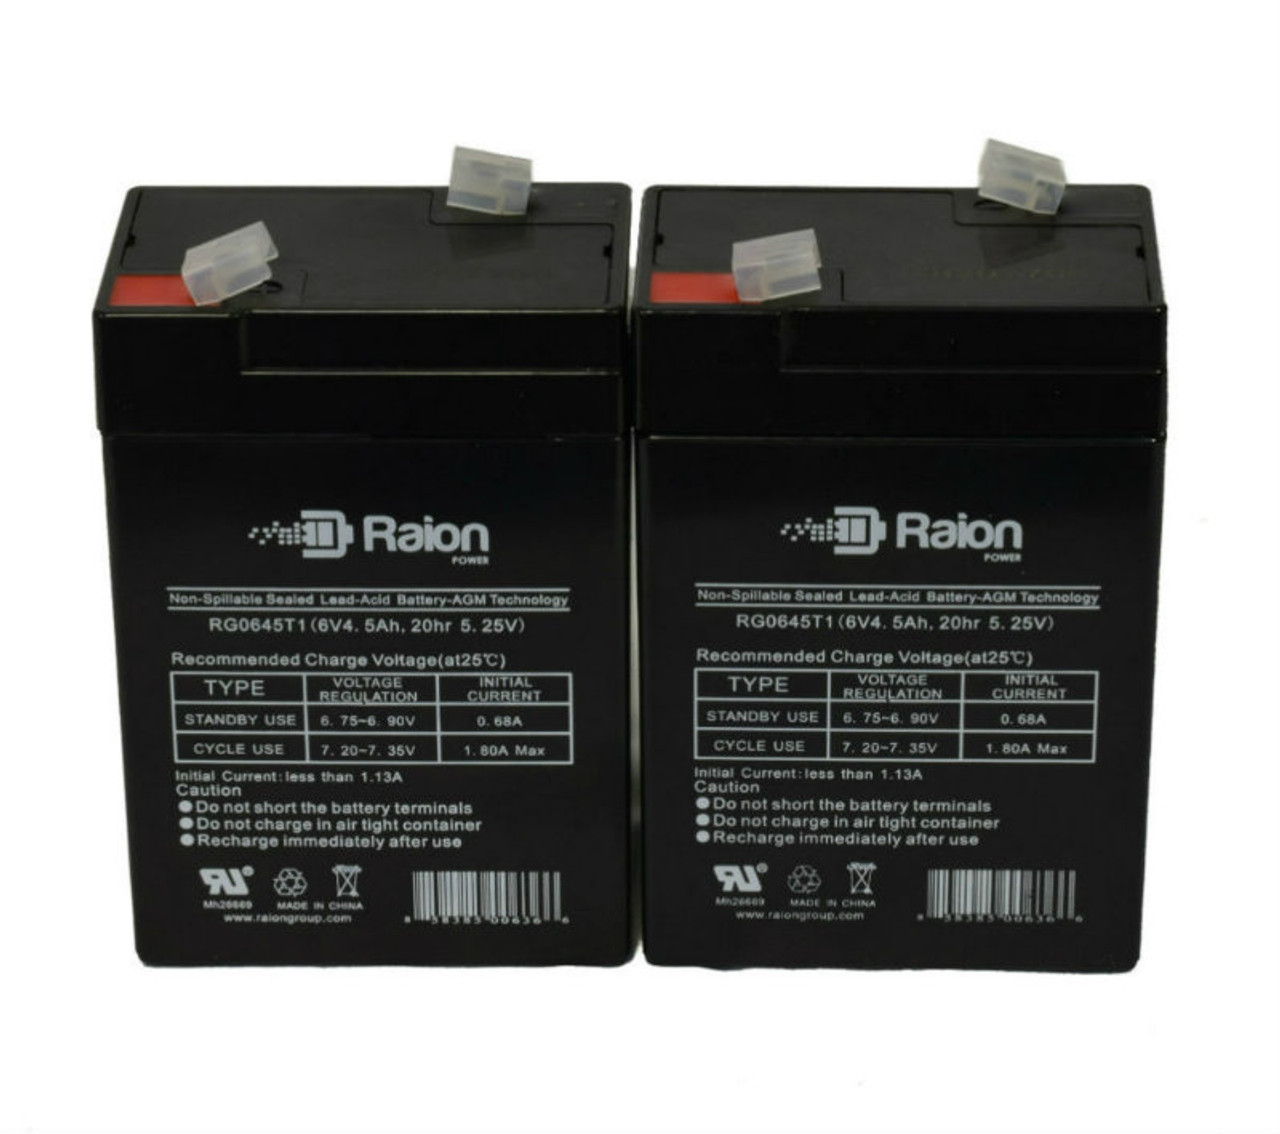 Raion Power 6V 4.5Ah Replacement Emergency Light Battery for Sho-Me 9985 - 2 Pack